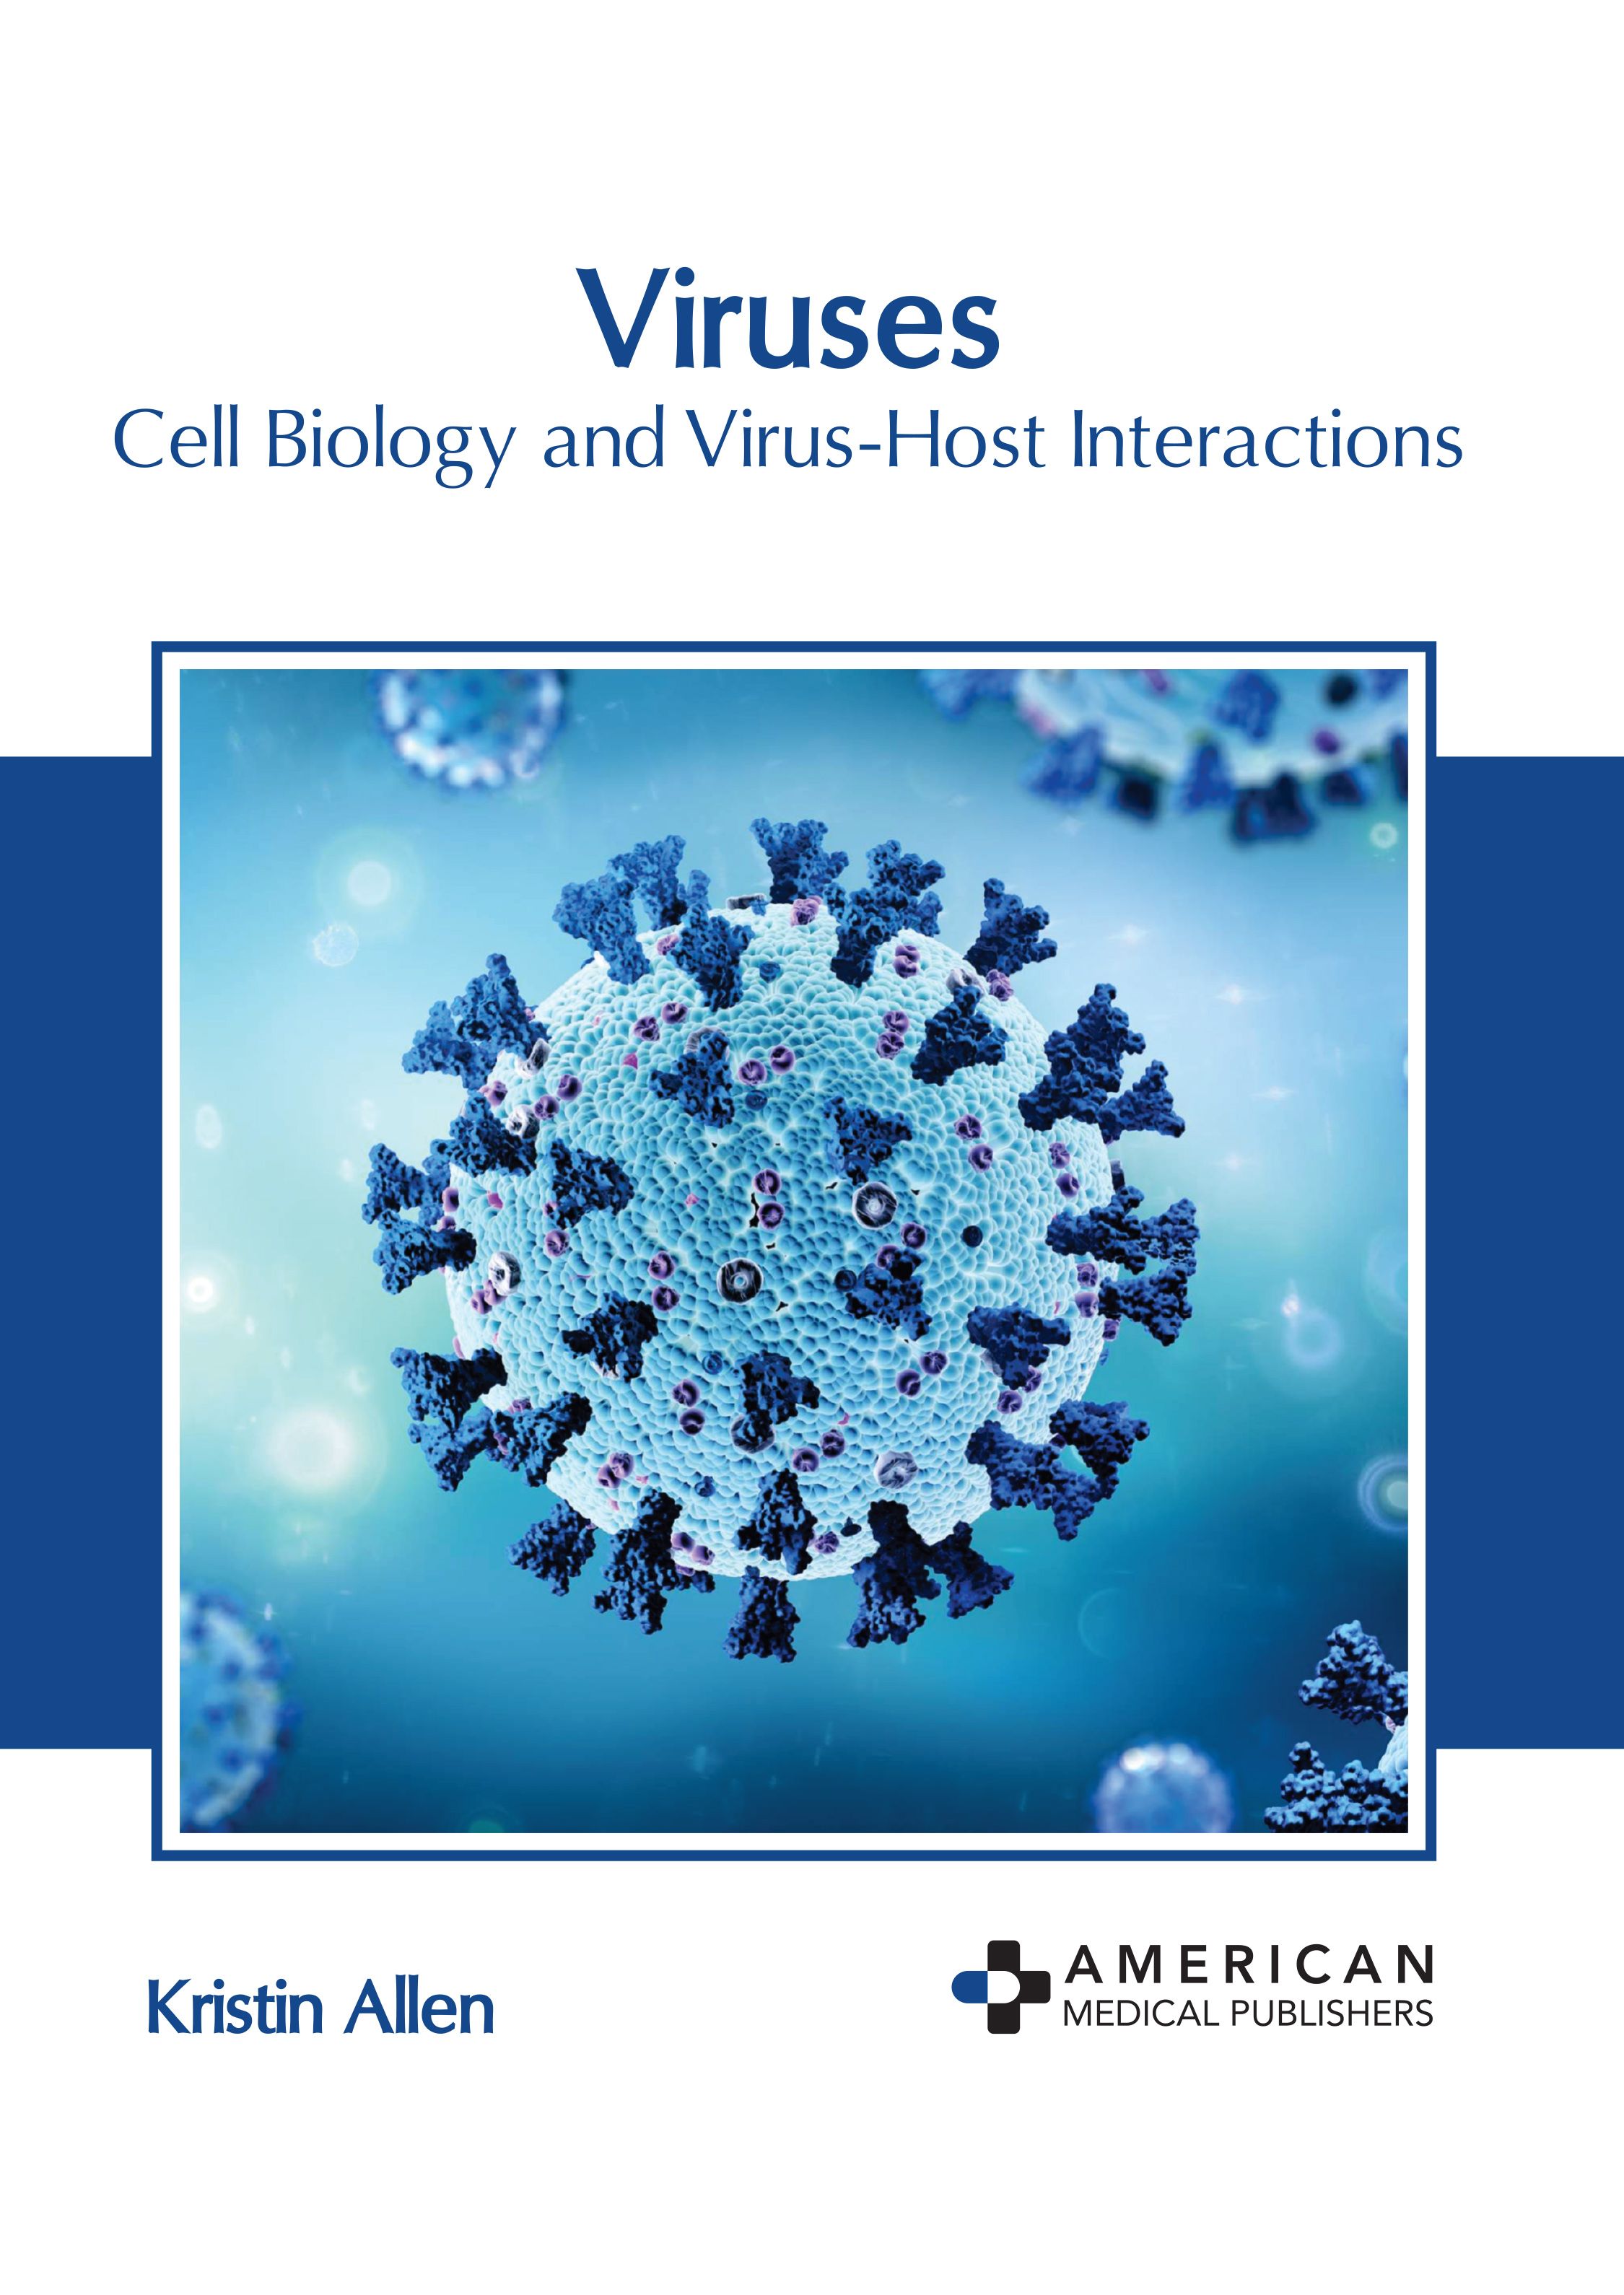 

exclusive-publishers/american-medical-publishers/viruses-cell-biology-and-virus-host-interactions-9781639278220